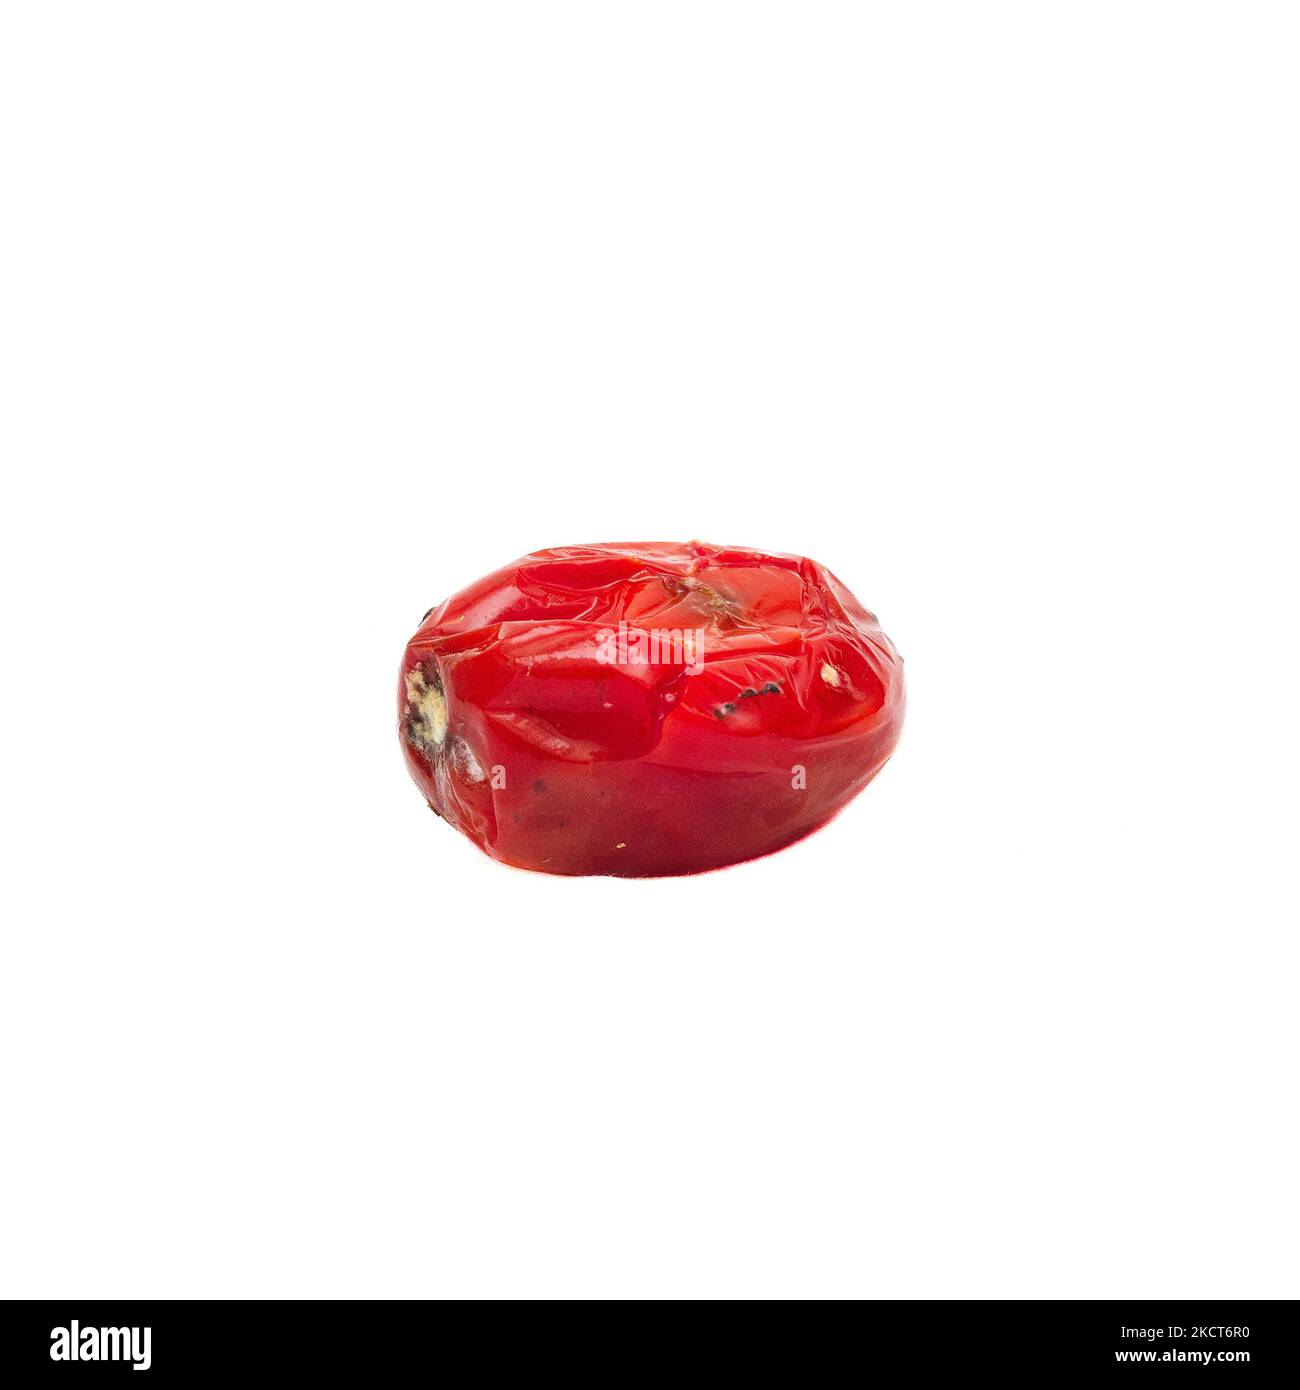 Small rotten spoiled tomato isolated on white background. Stock Photo